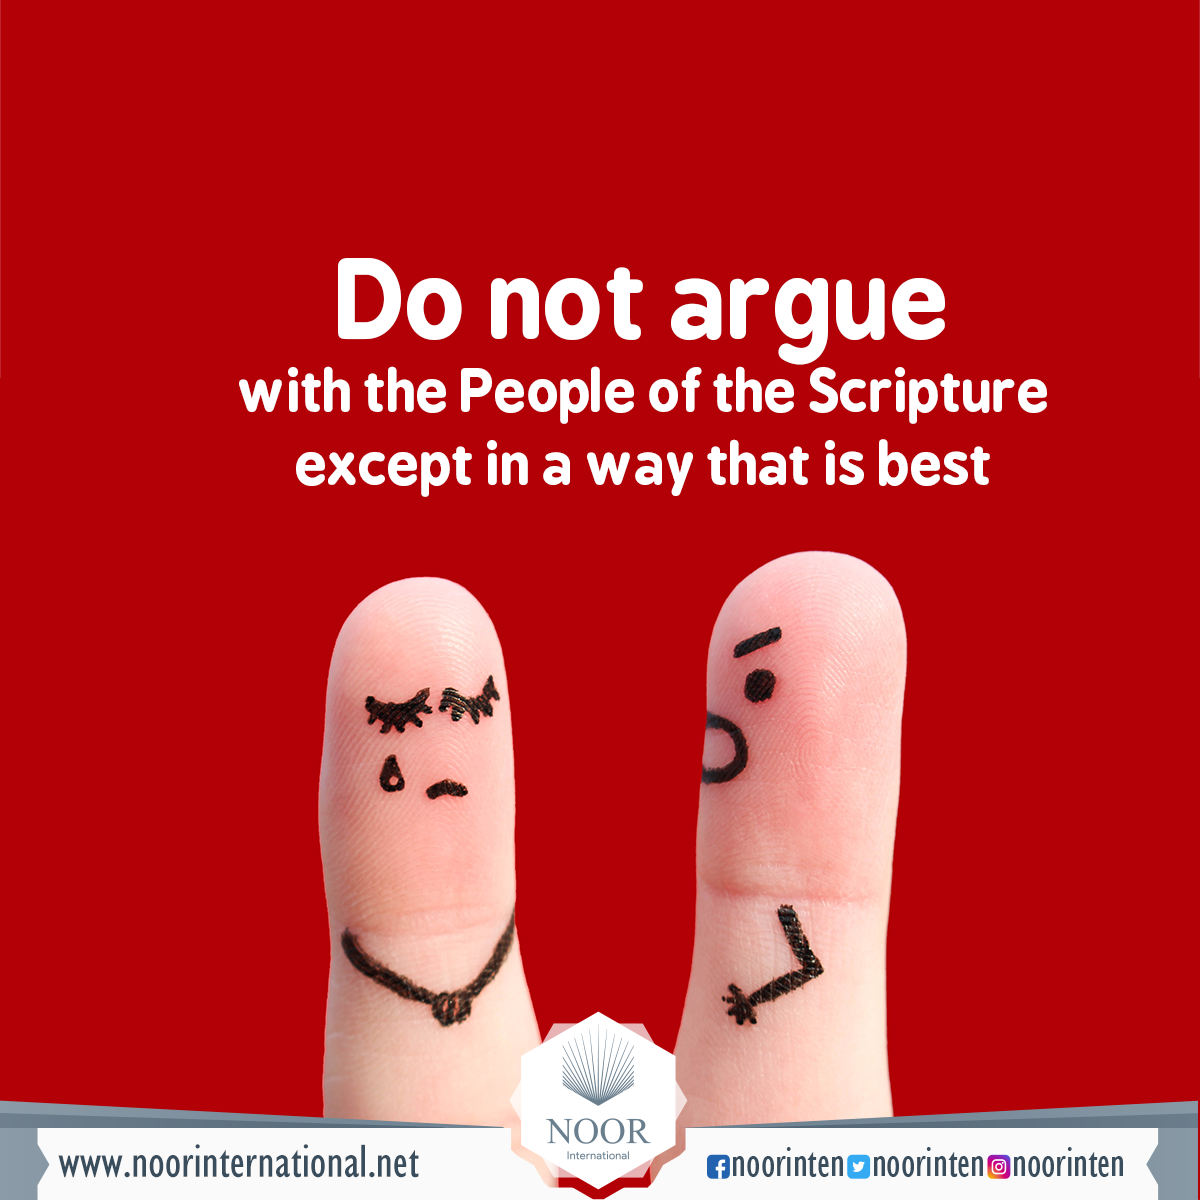 Do not argue with the People of the Scripture except in a way that is best